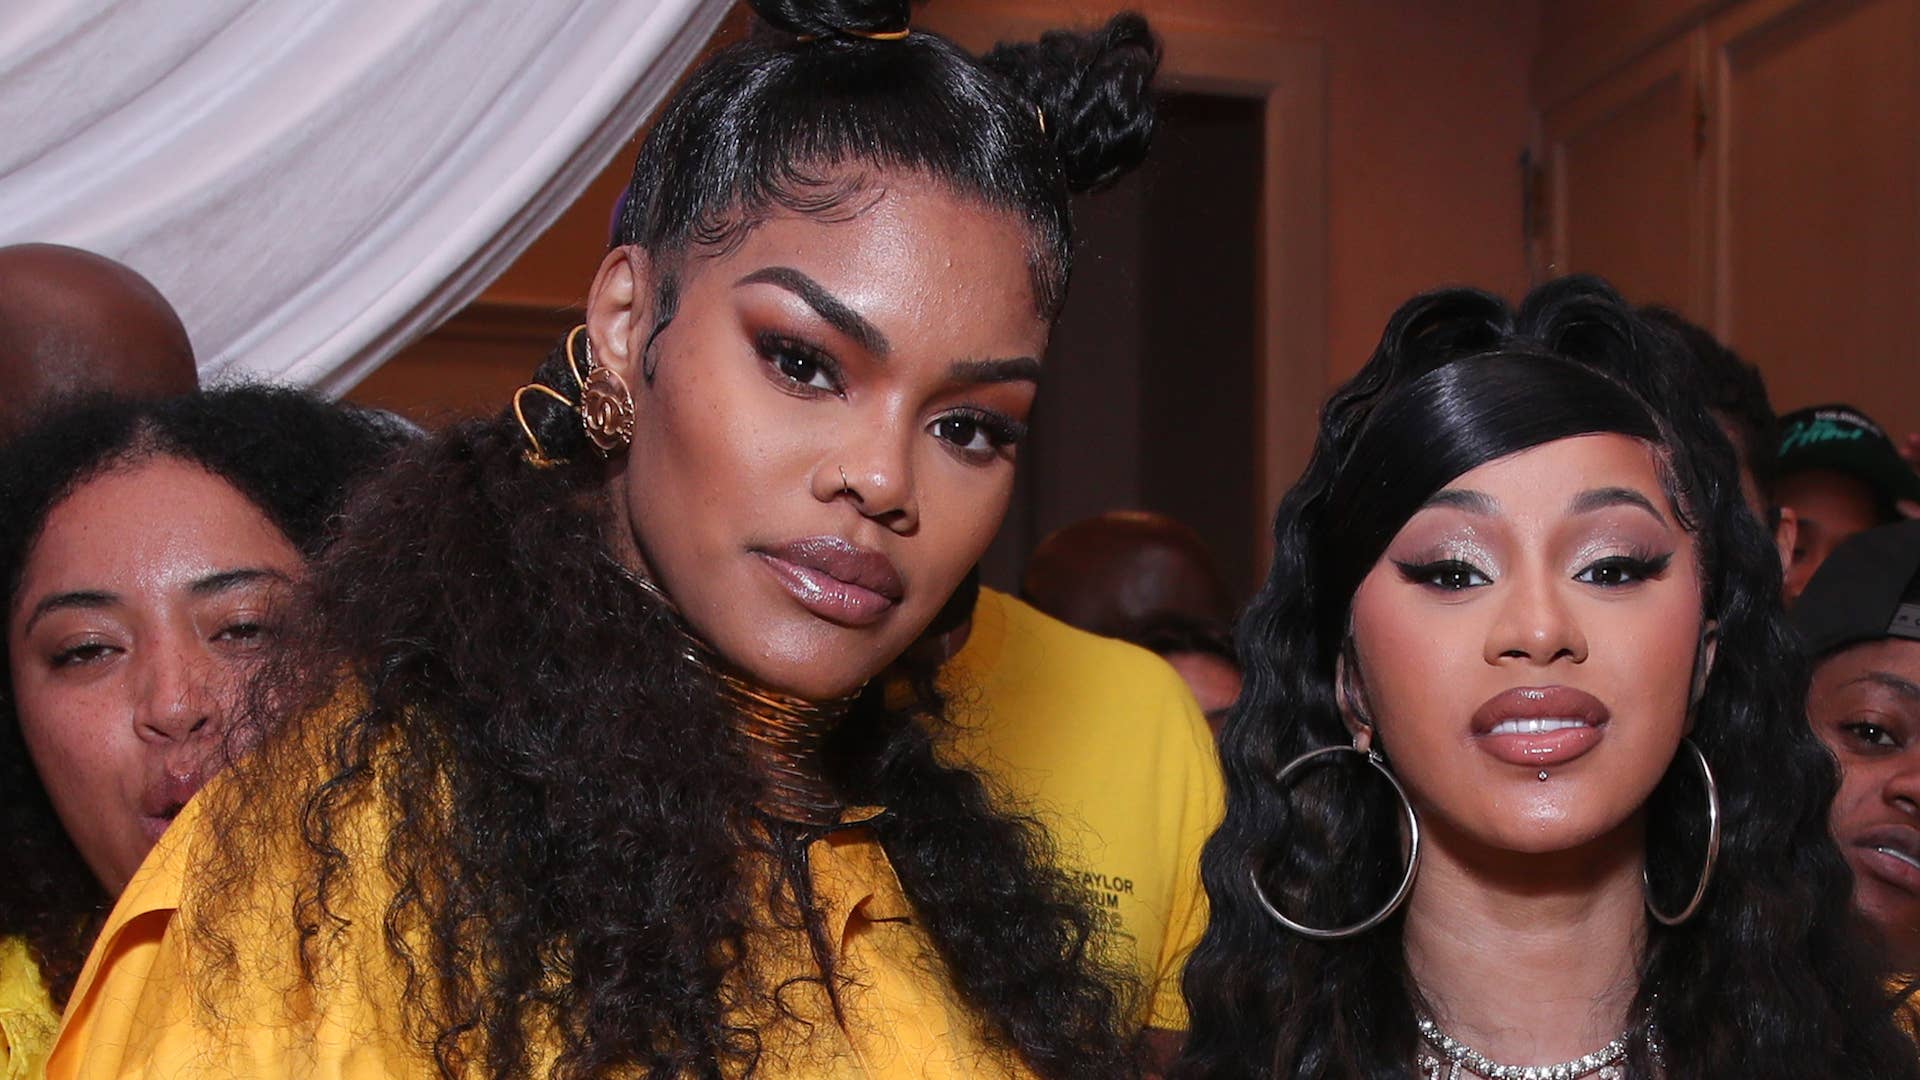 Teyana Taylor and Cardi B attend the Teyana Taylor "The Album" Listening Party